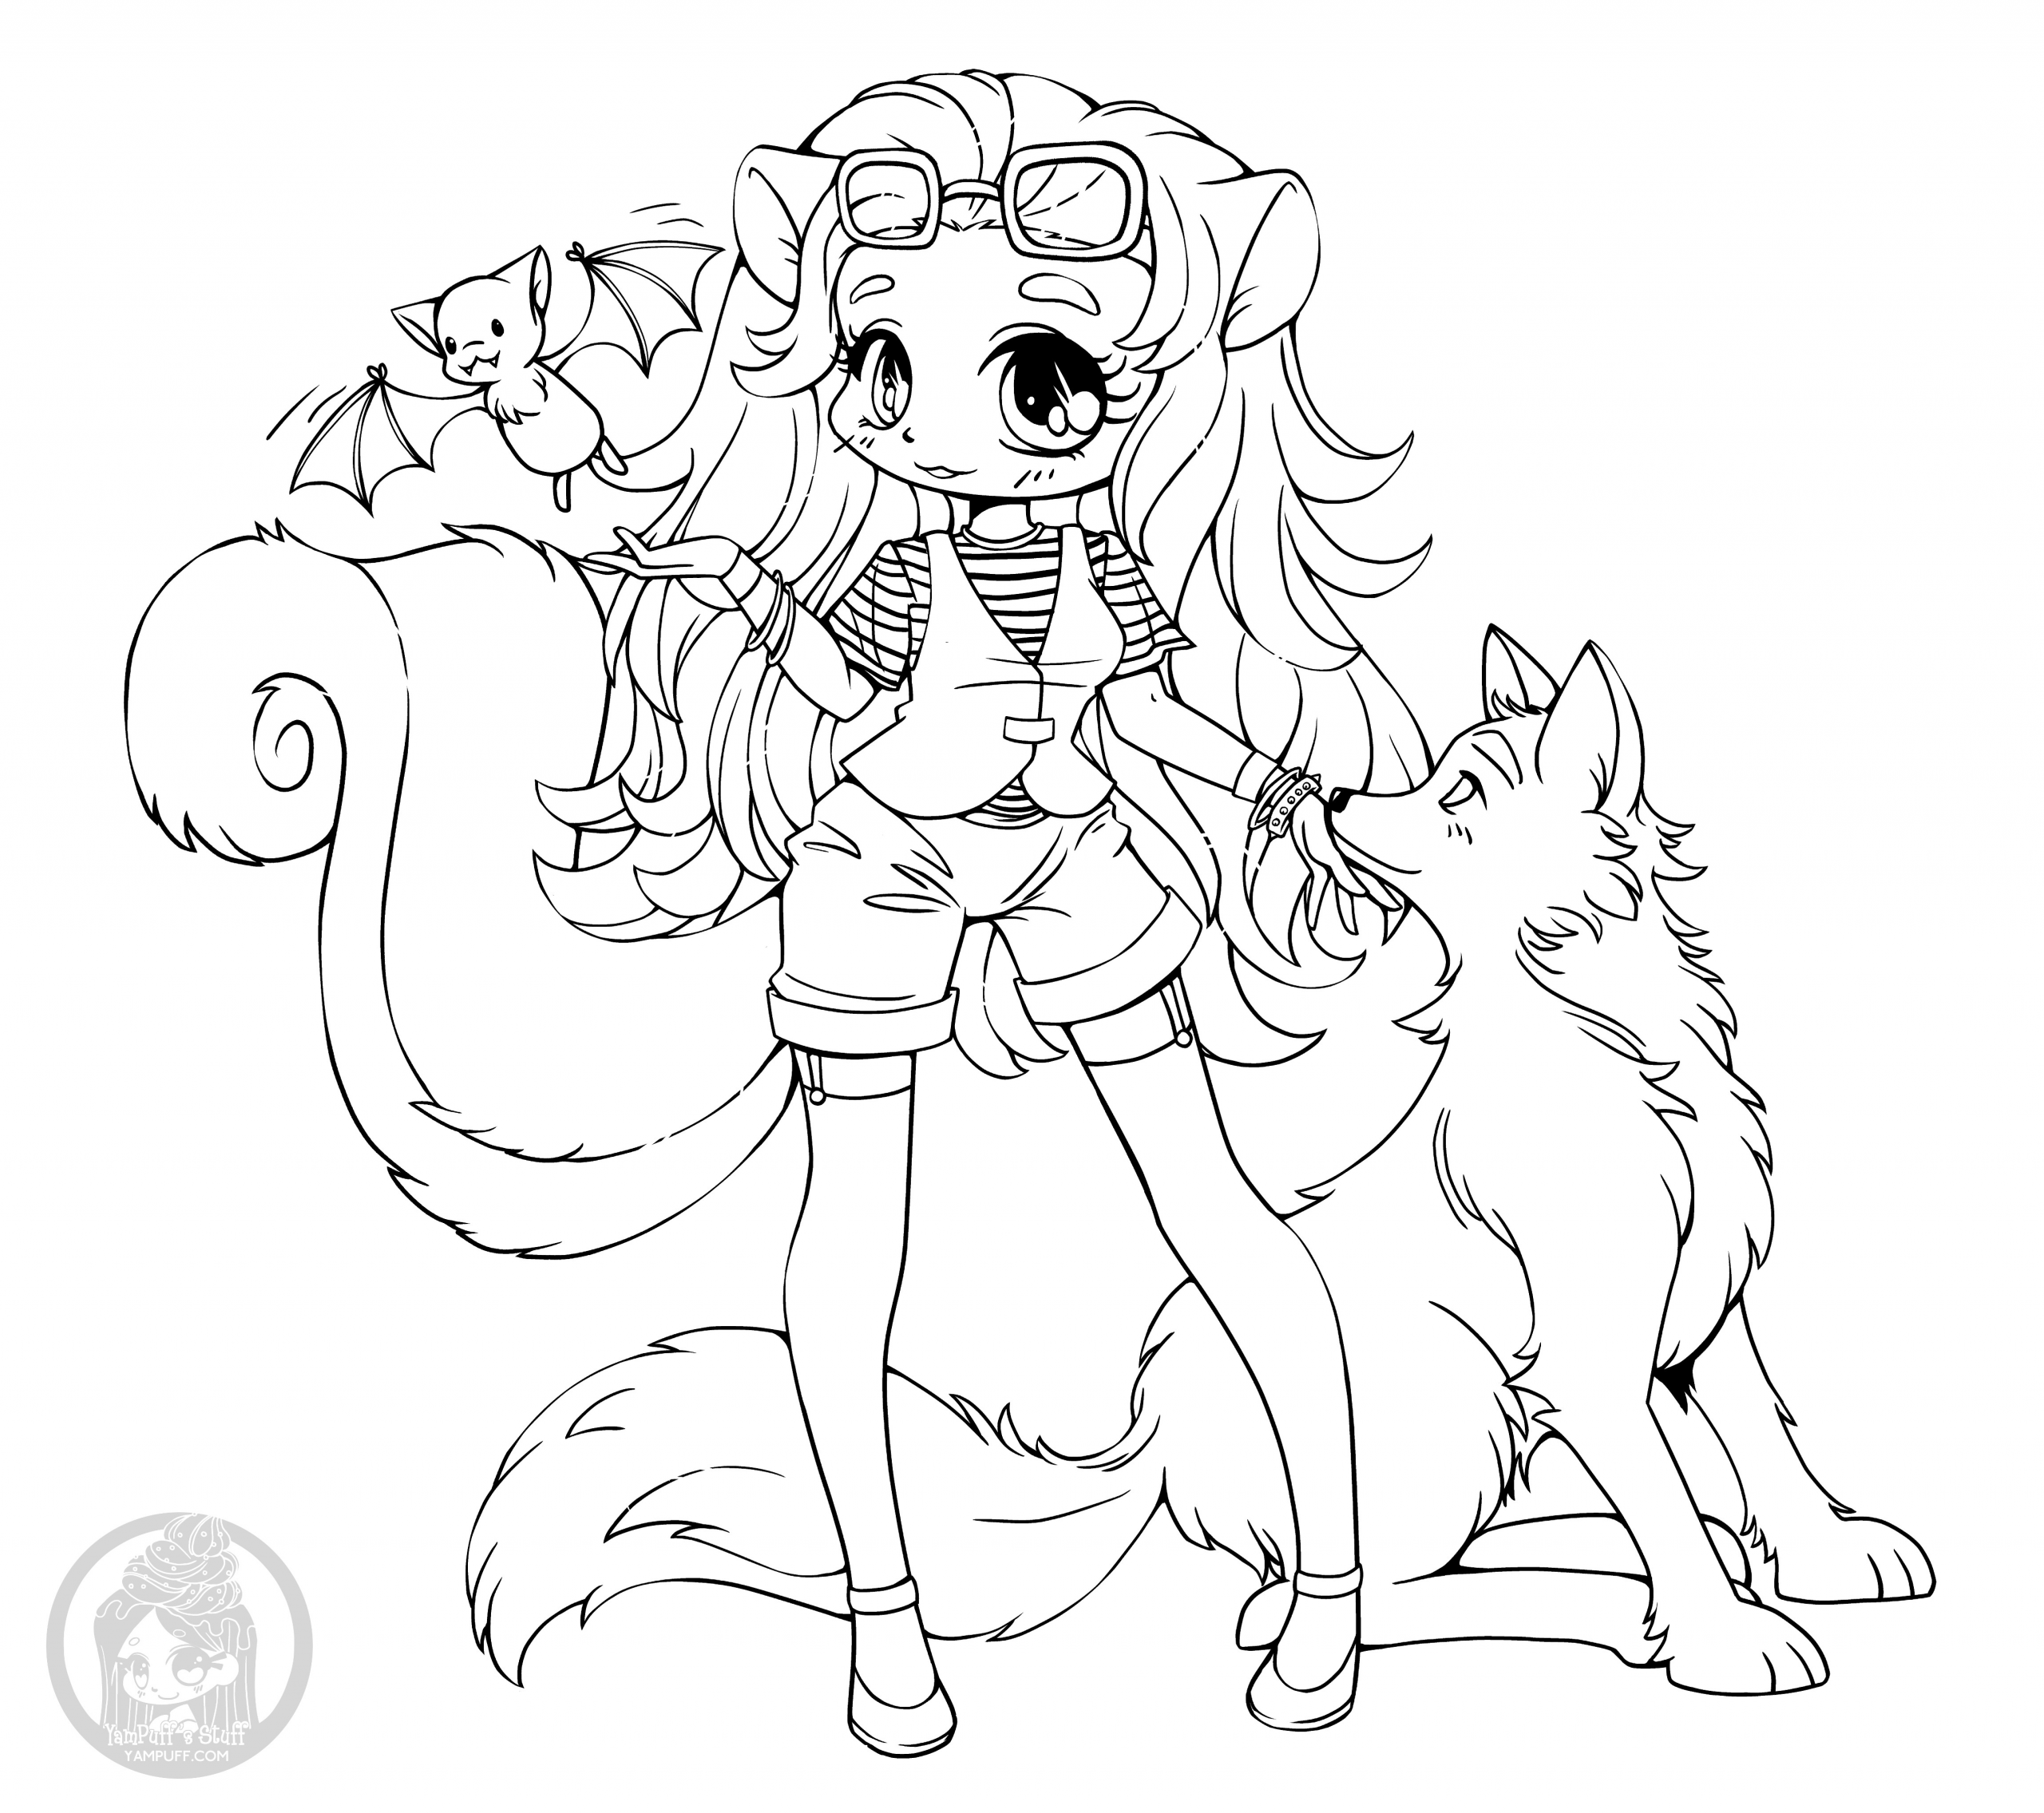 The Best Ideas for Chibi Girls Coloring Pages – Home, Family, Style and ...